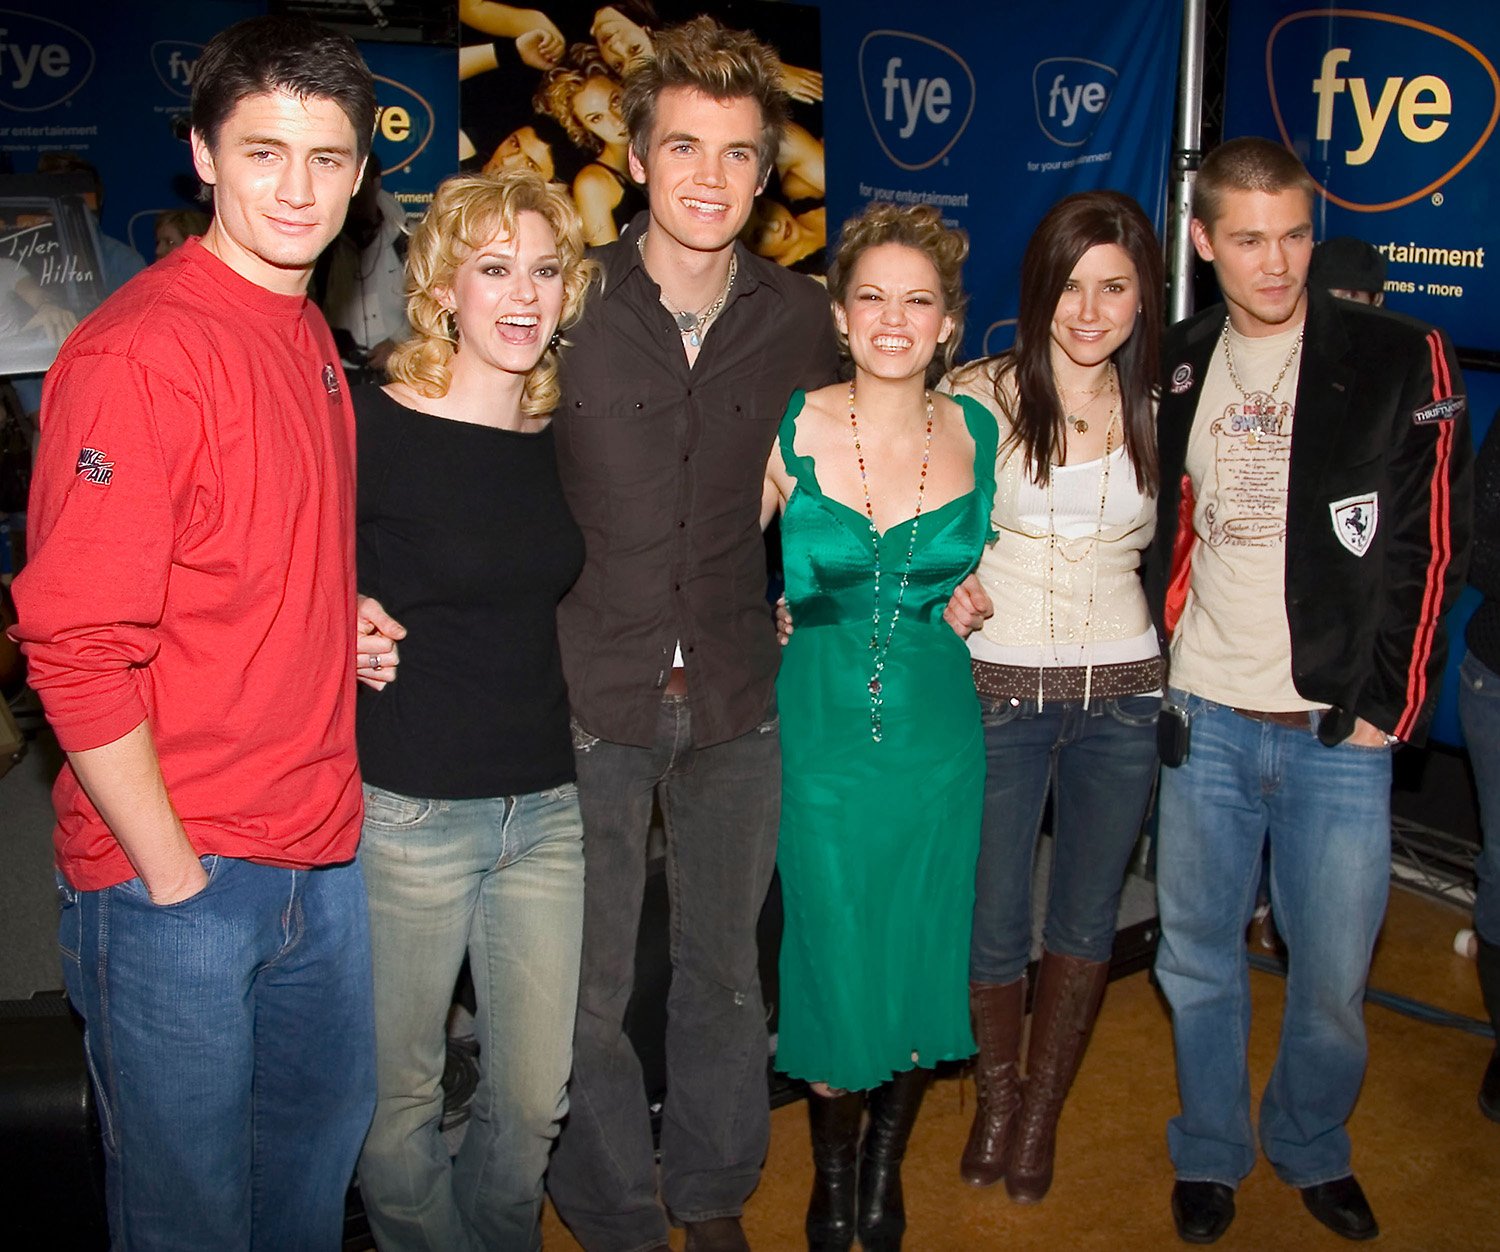 'One Tree Hill' cast at FYE